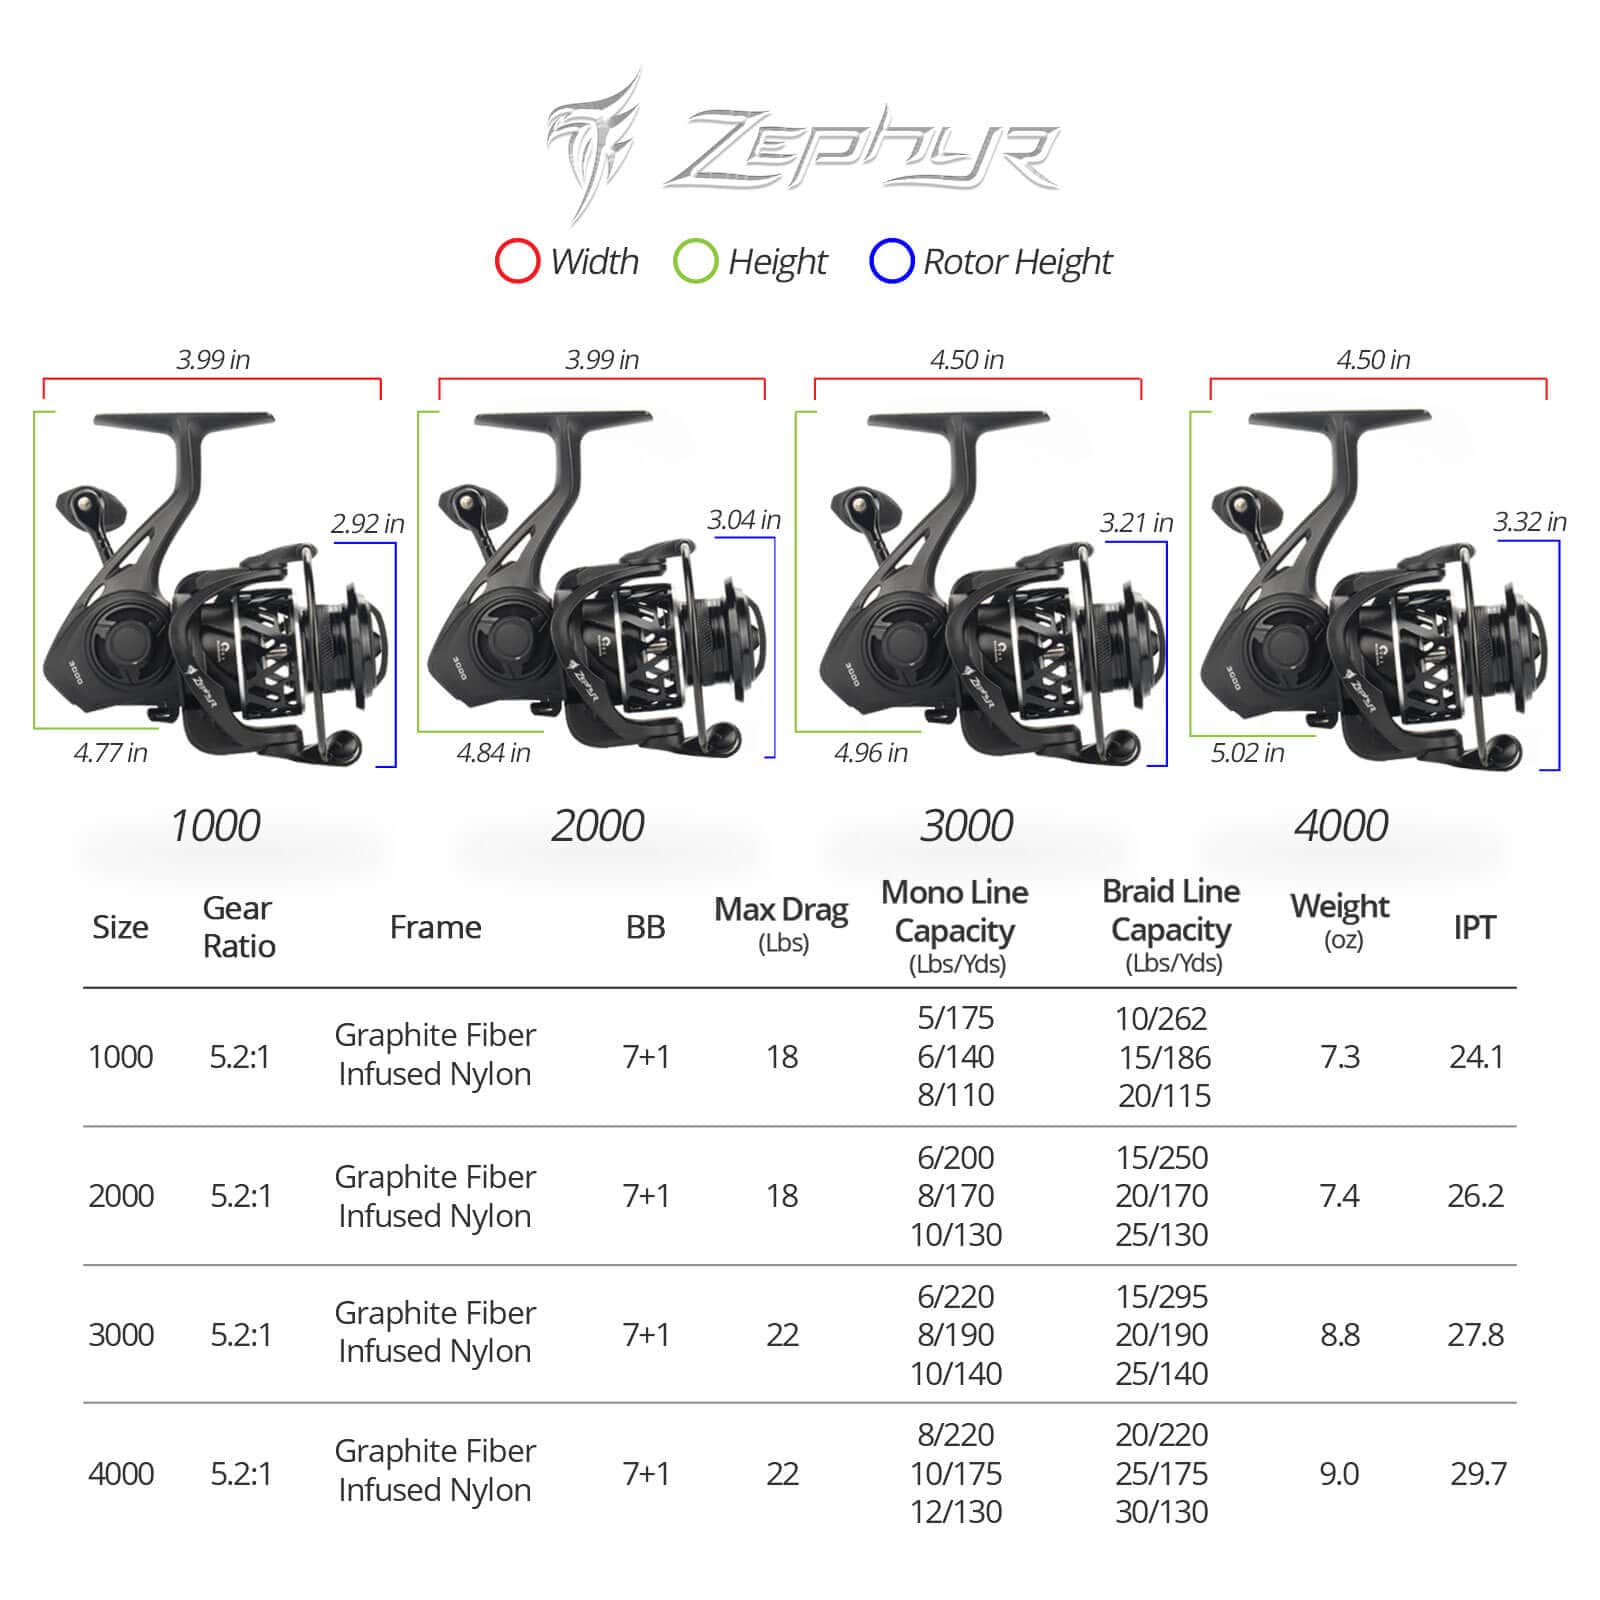 KastKing Zephyr Spinning Reel - Size 500 is Perfect for Ice Fishing, Up to  22Lb Max Drag, Ultralight & Smooth Powerful Fishing Reel, 5.2:1 Gear Ratio